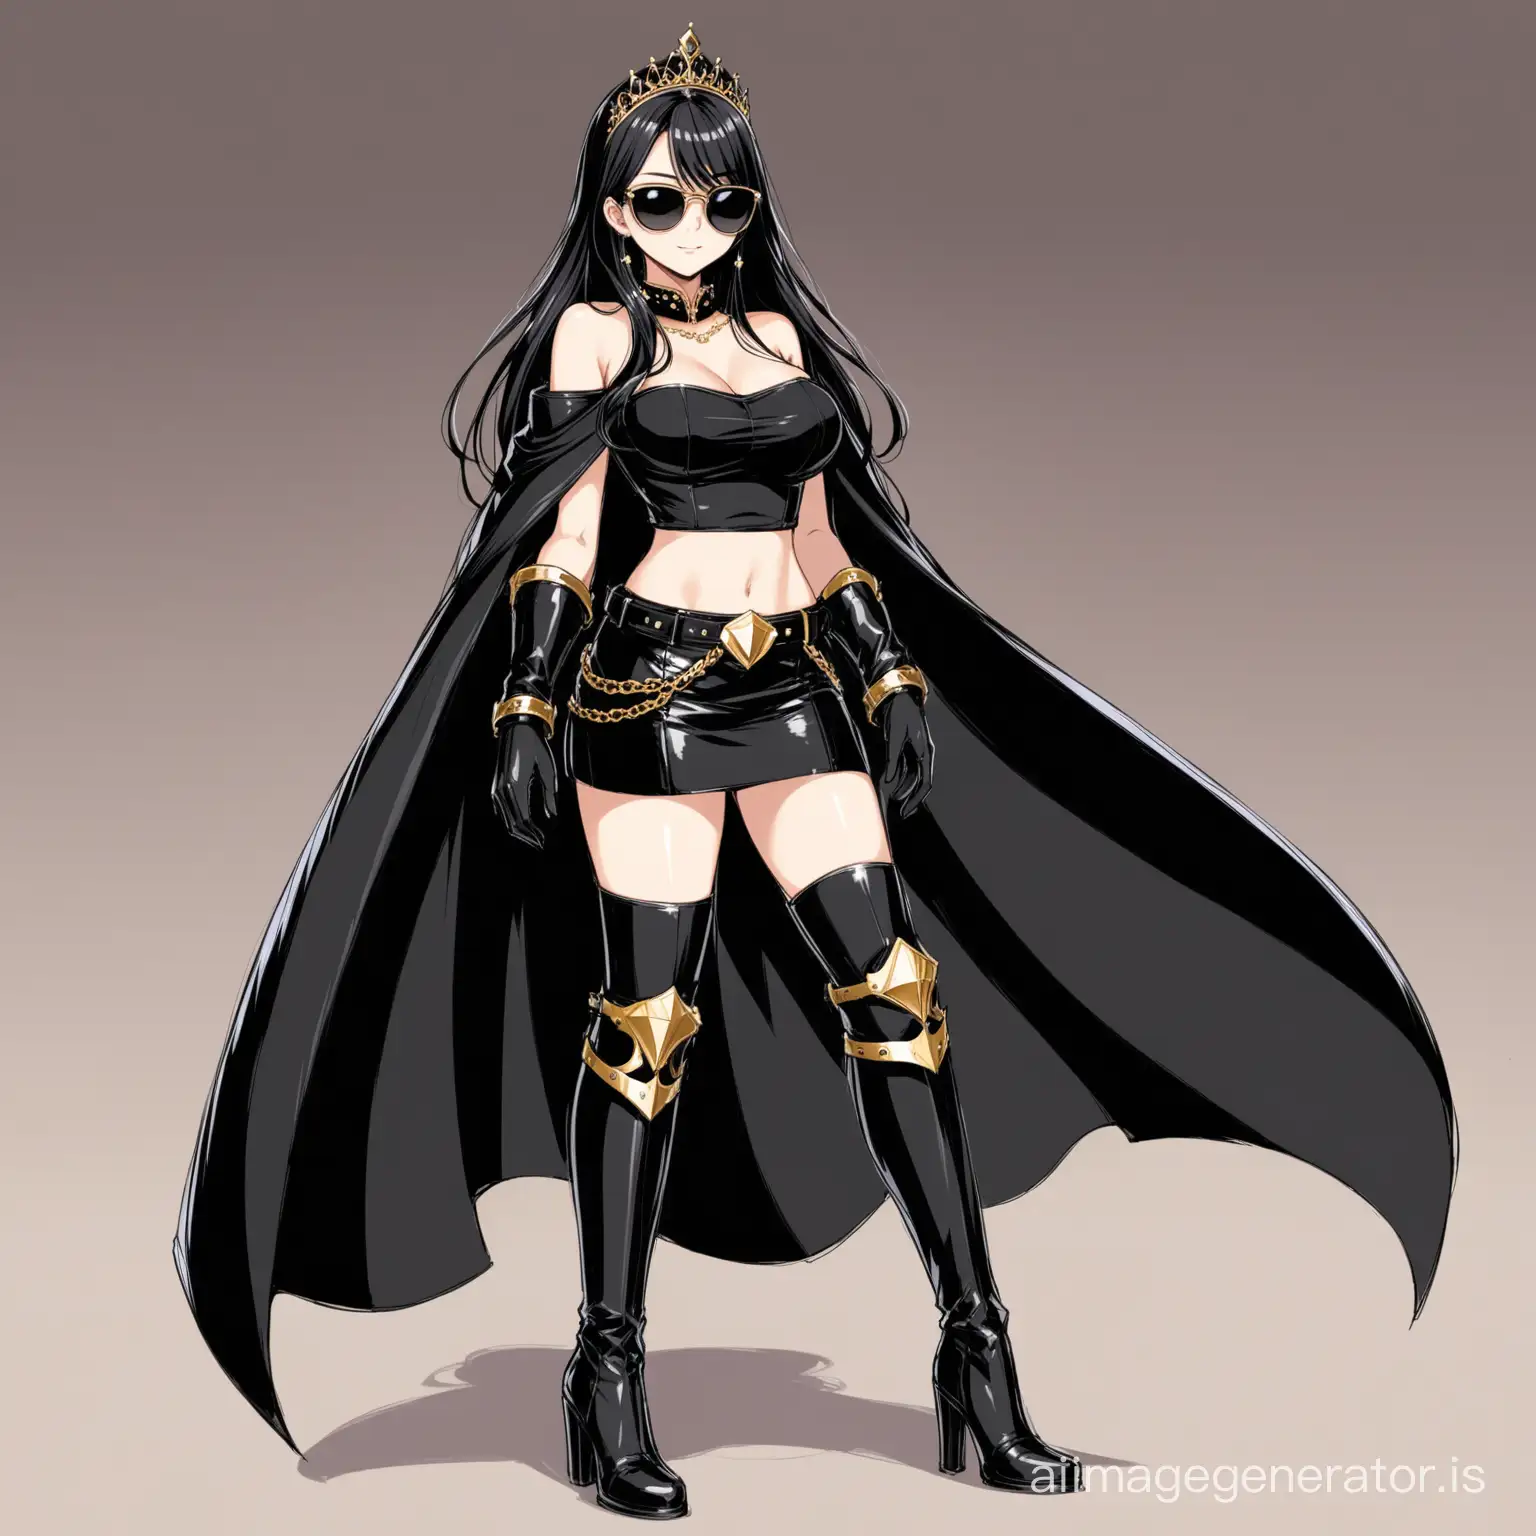 Anime-Princess-in-Black-Leather-Outfit-with-Royal-Tiara